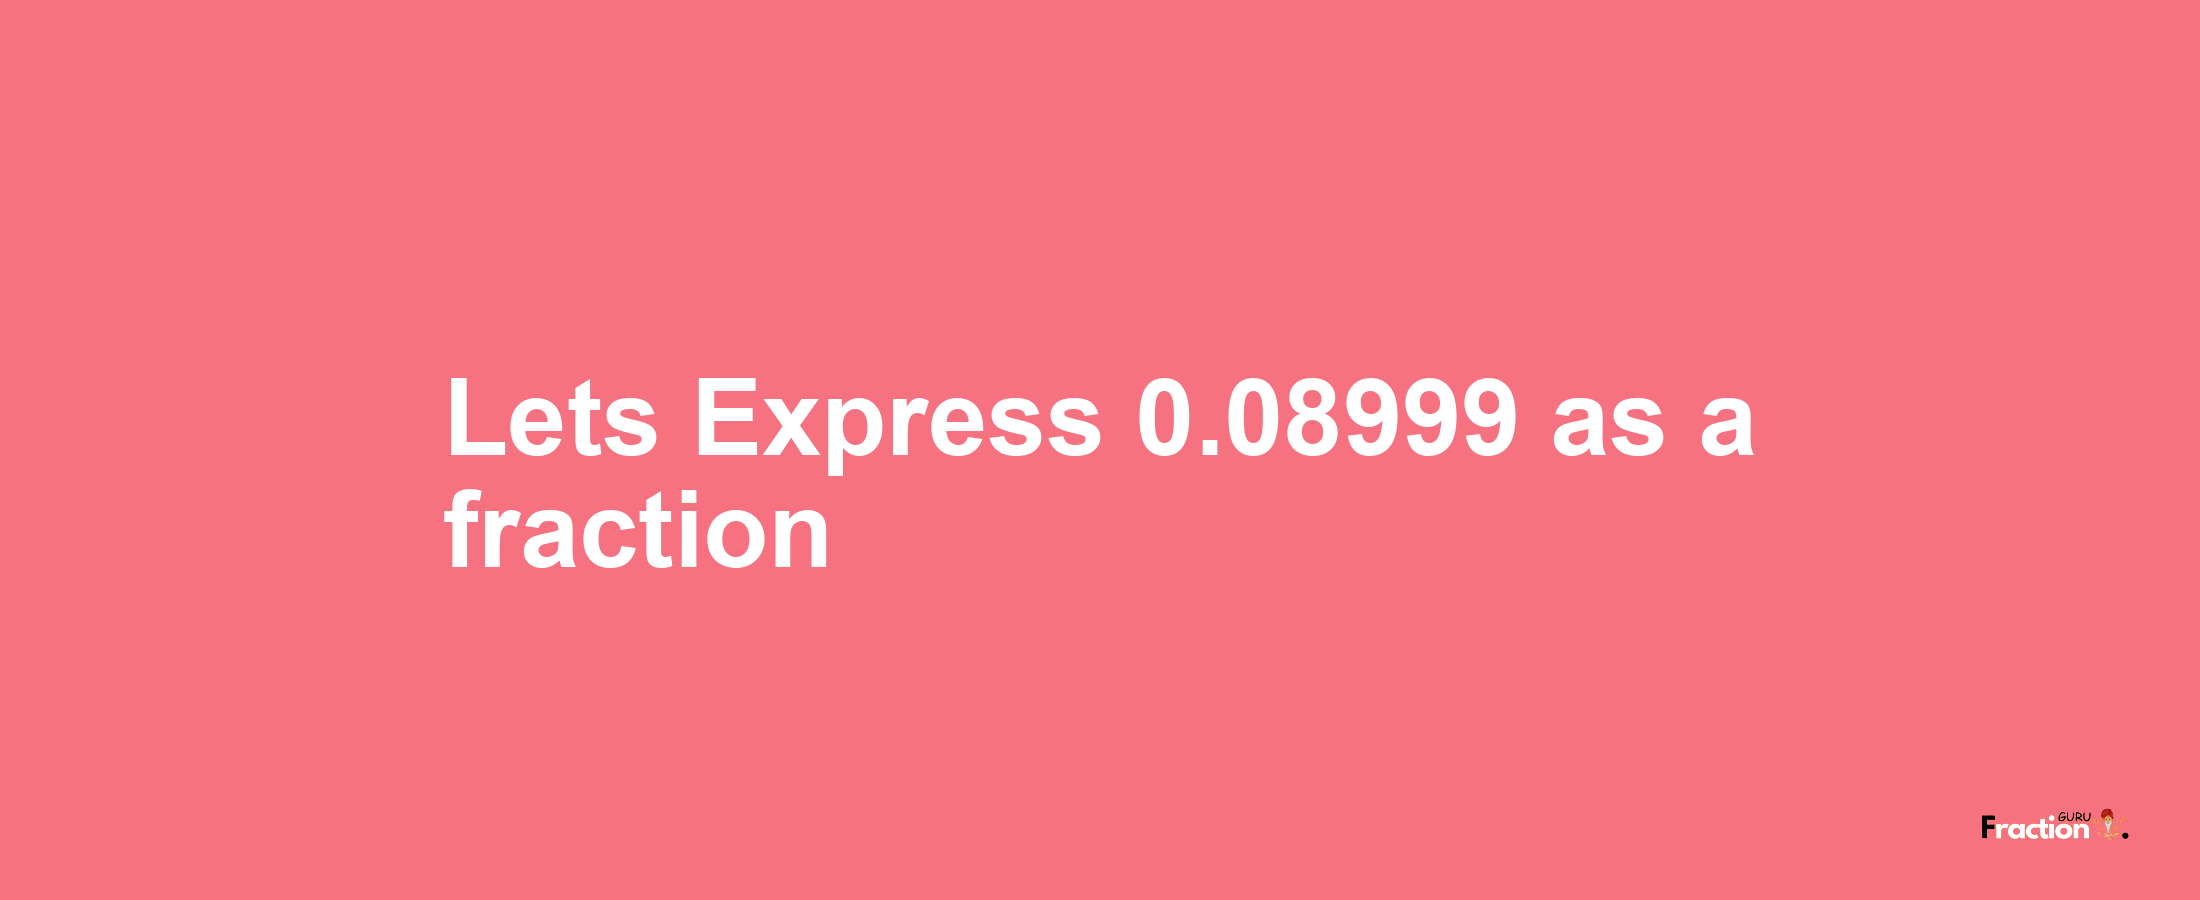 Lets Express 0.08999 as afraction